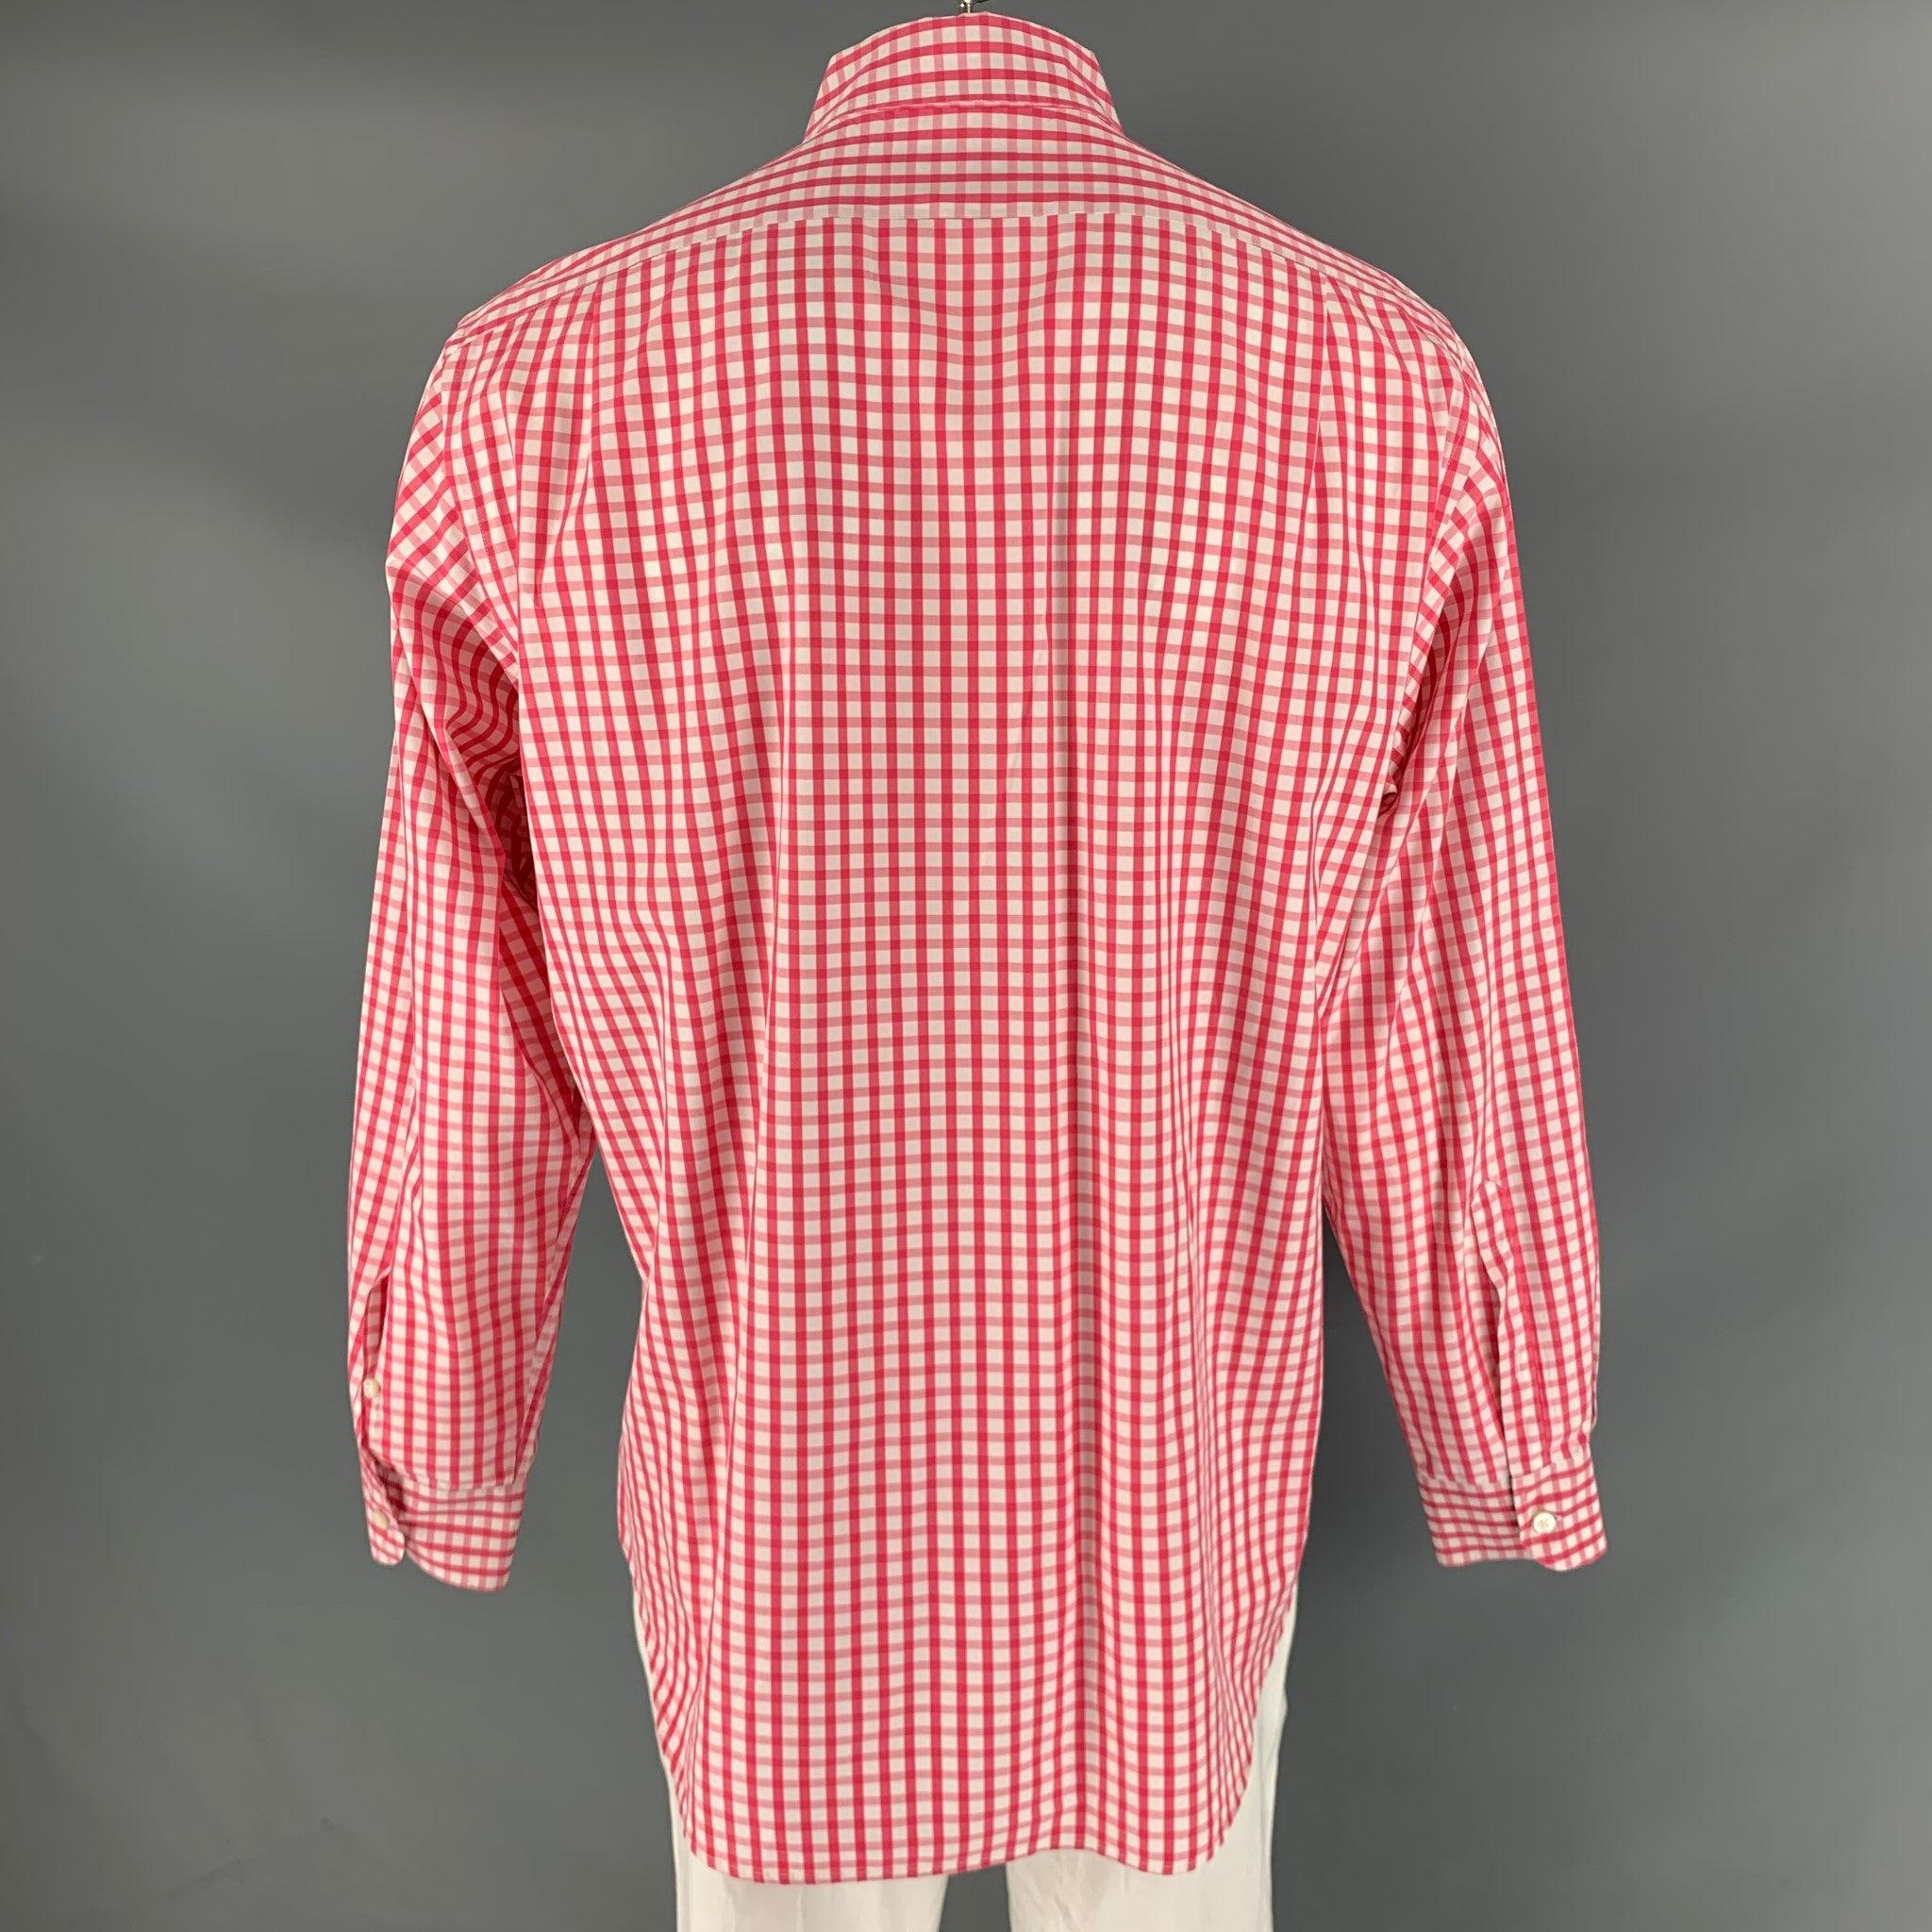 RALPH LAUREN Size XL Red White Checkered Cotton One pocket Long Sleeve Shirt In Good Condition For Sale In San Francisco, CA